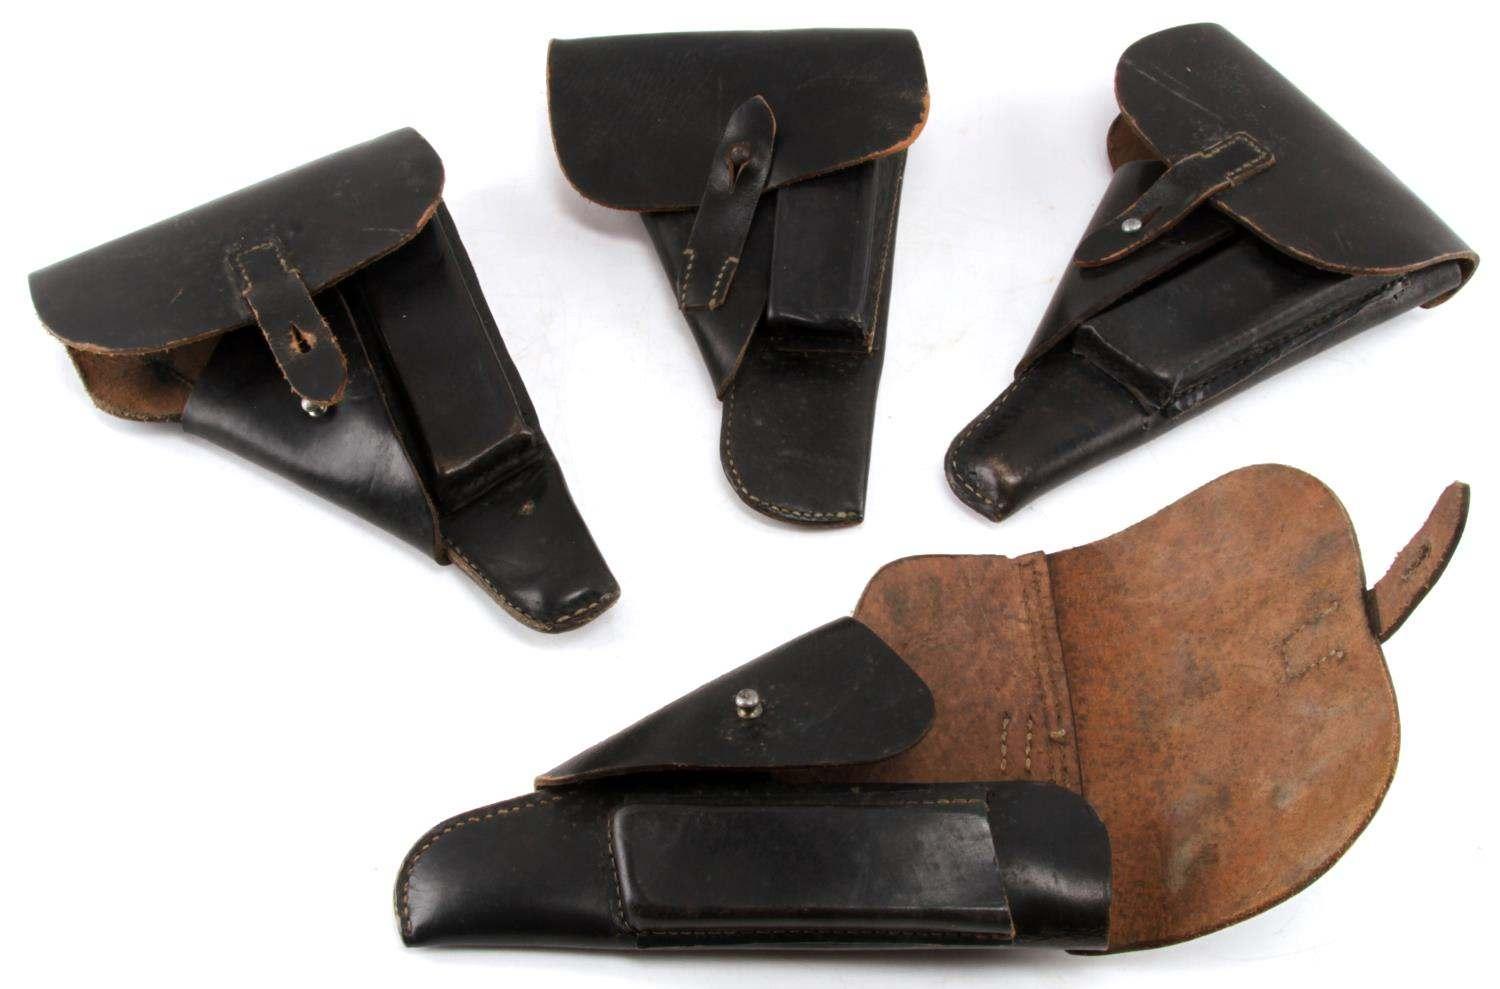 4 WWII GERMAN P38 BLACK LEATHER HOLSTERS